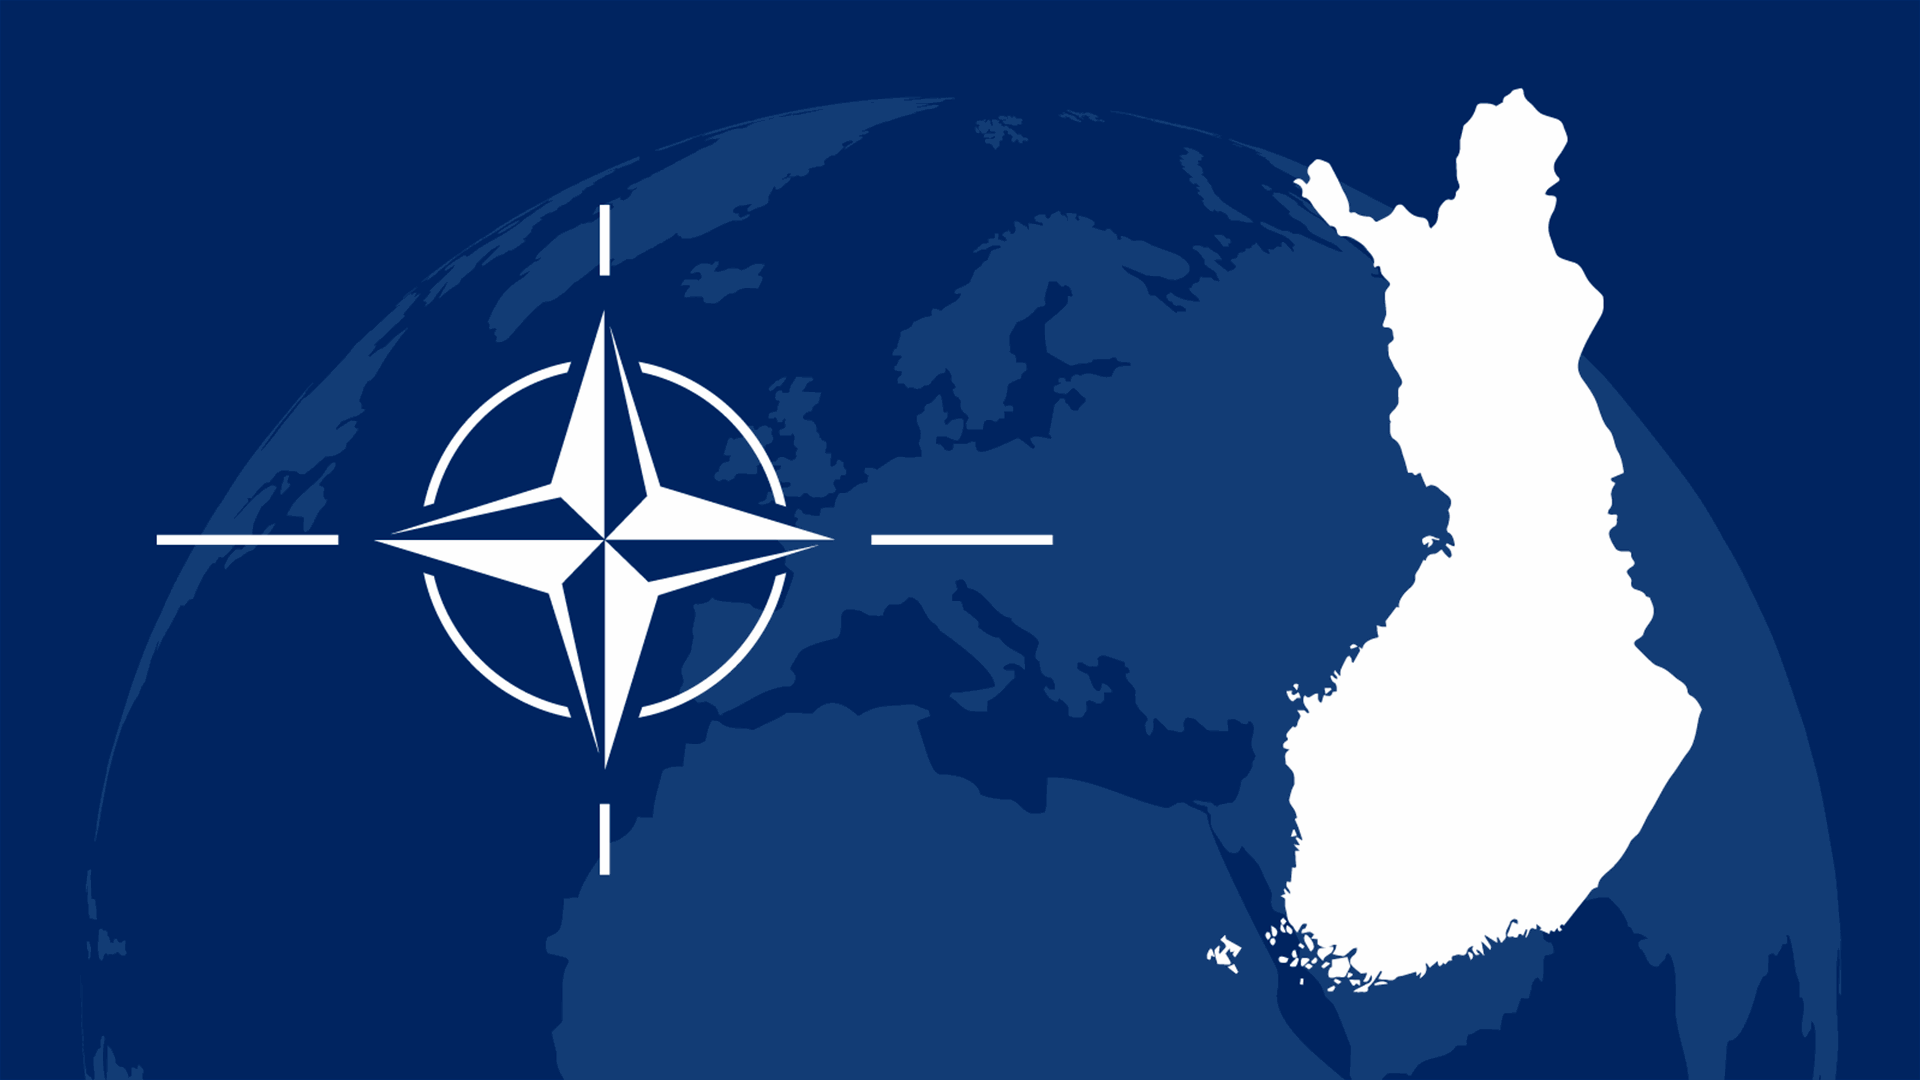 NATO Maneuvers and European Security: Challenges and Concerns